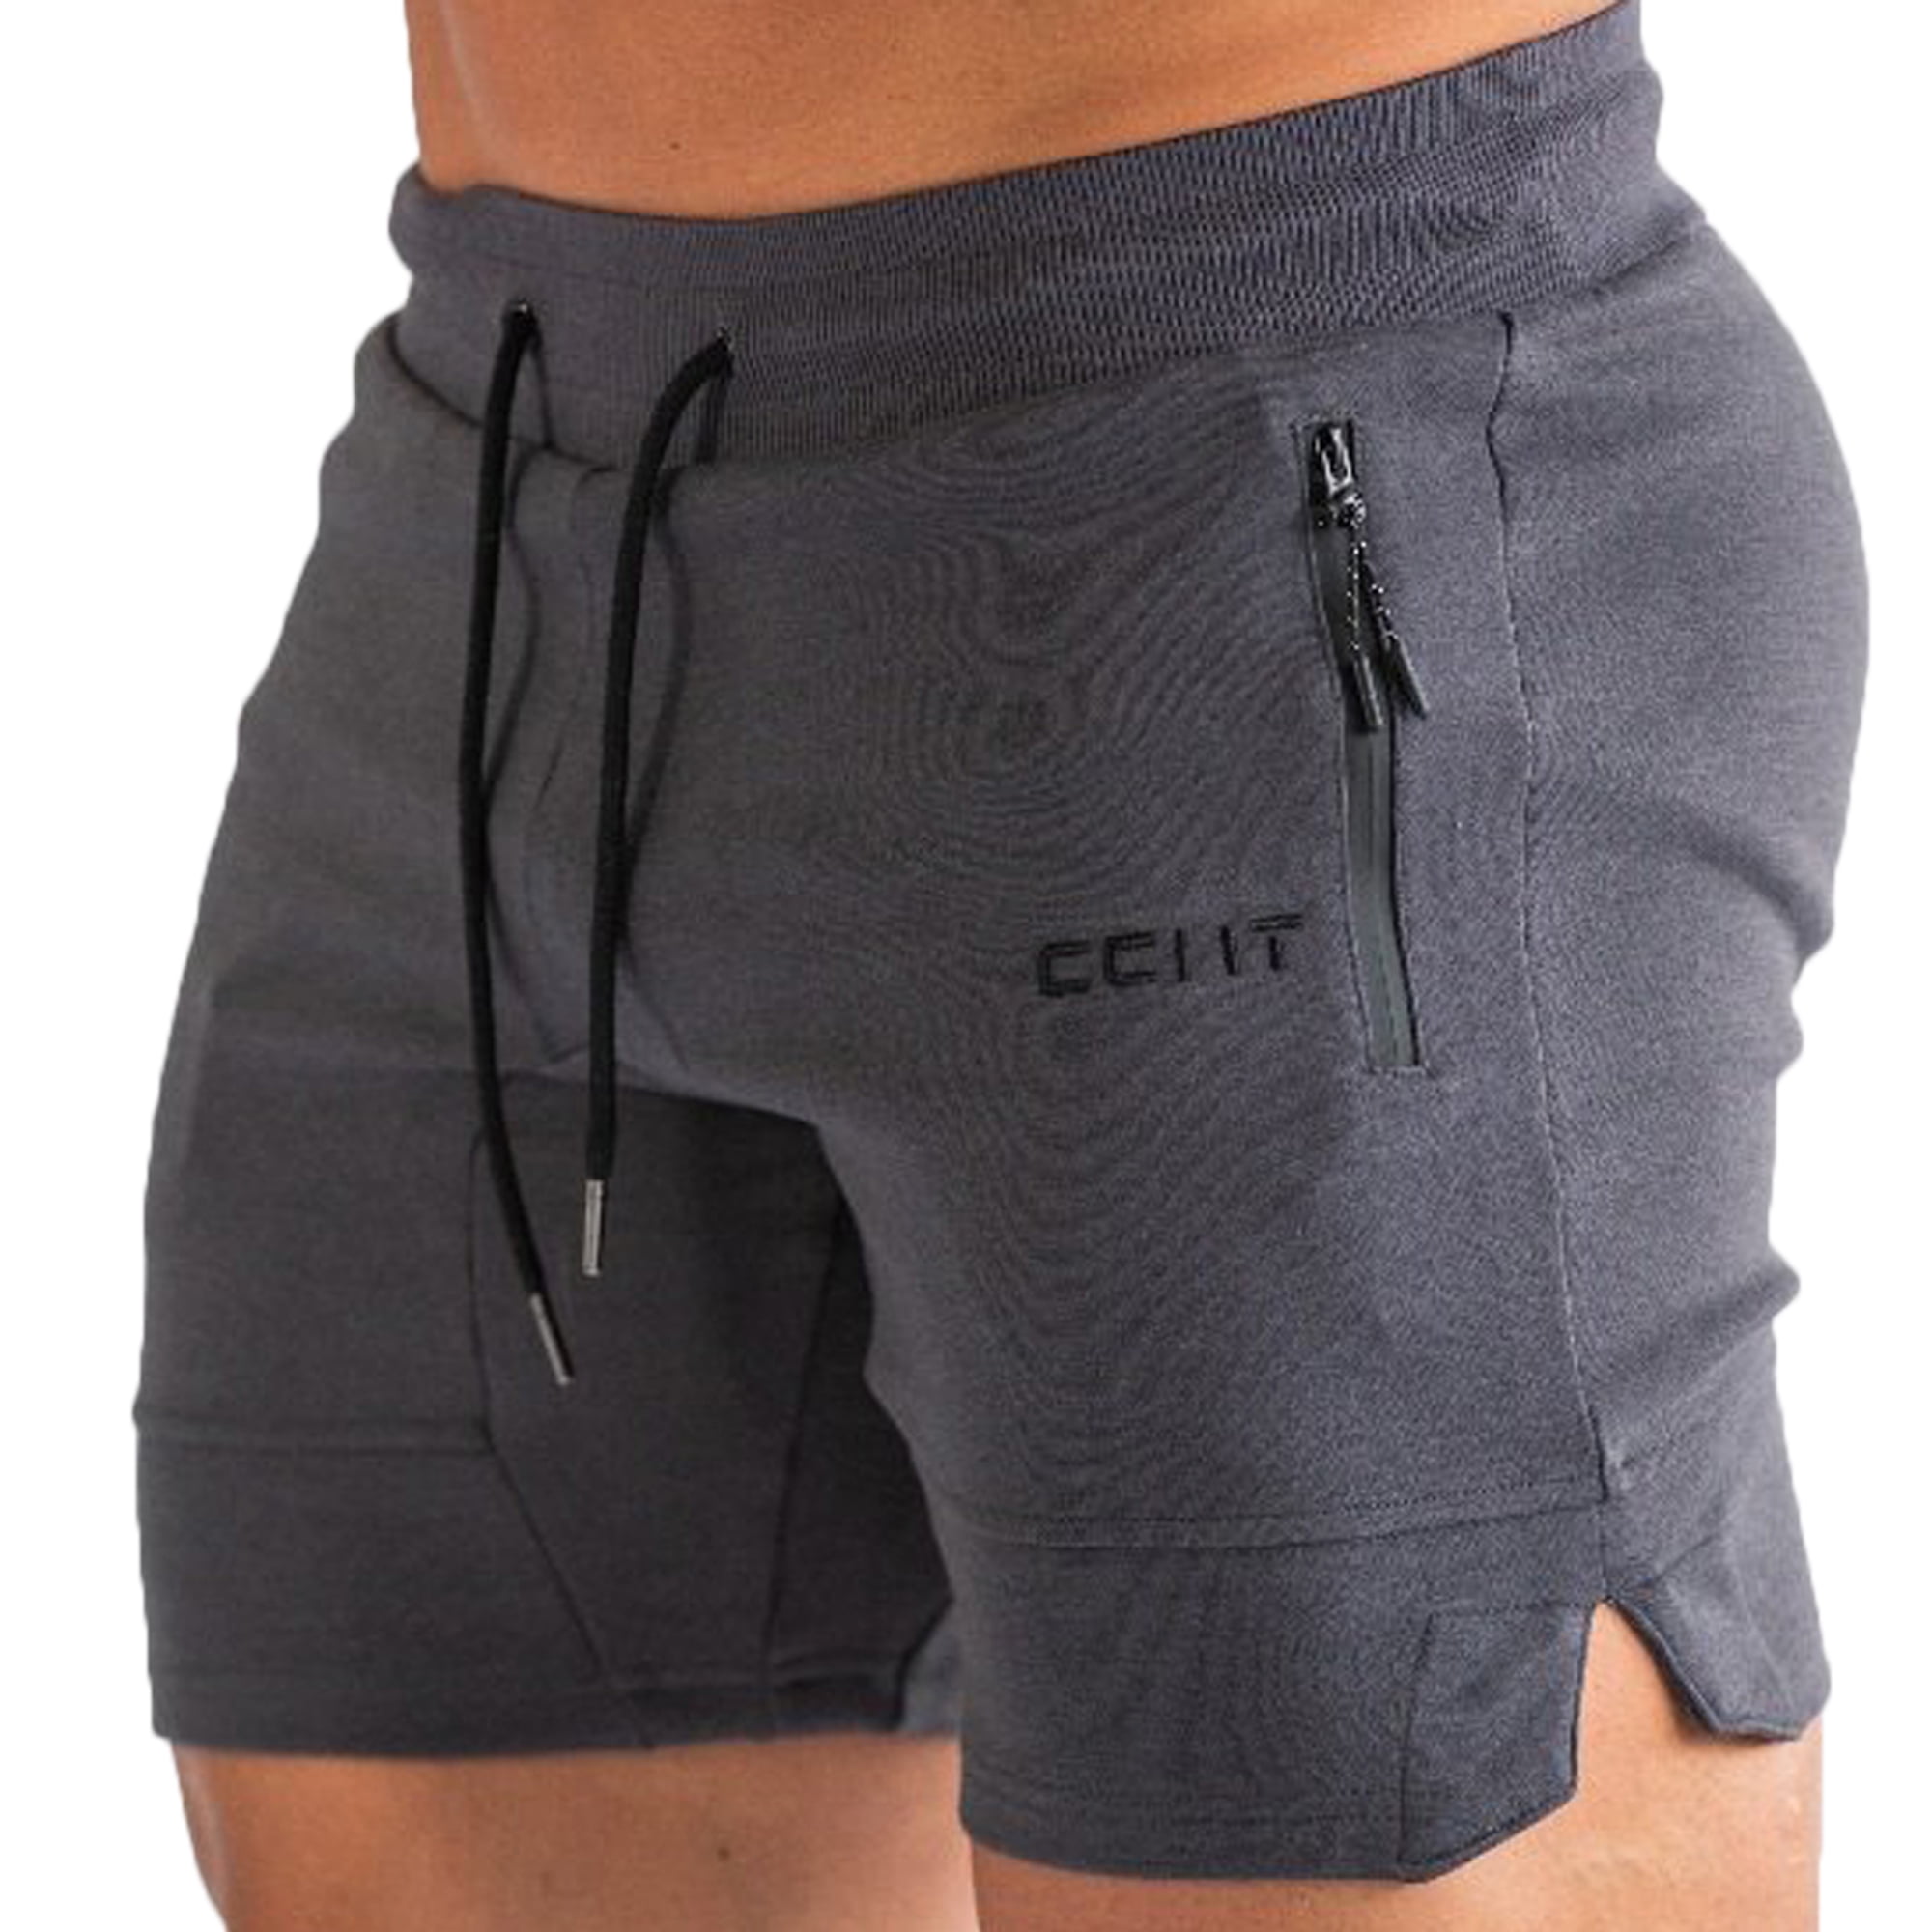 Mens Gym Training Shorts Workout Sports Casual Clothing Fitness Running Short